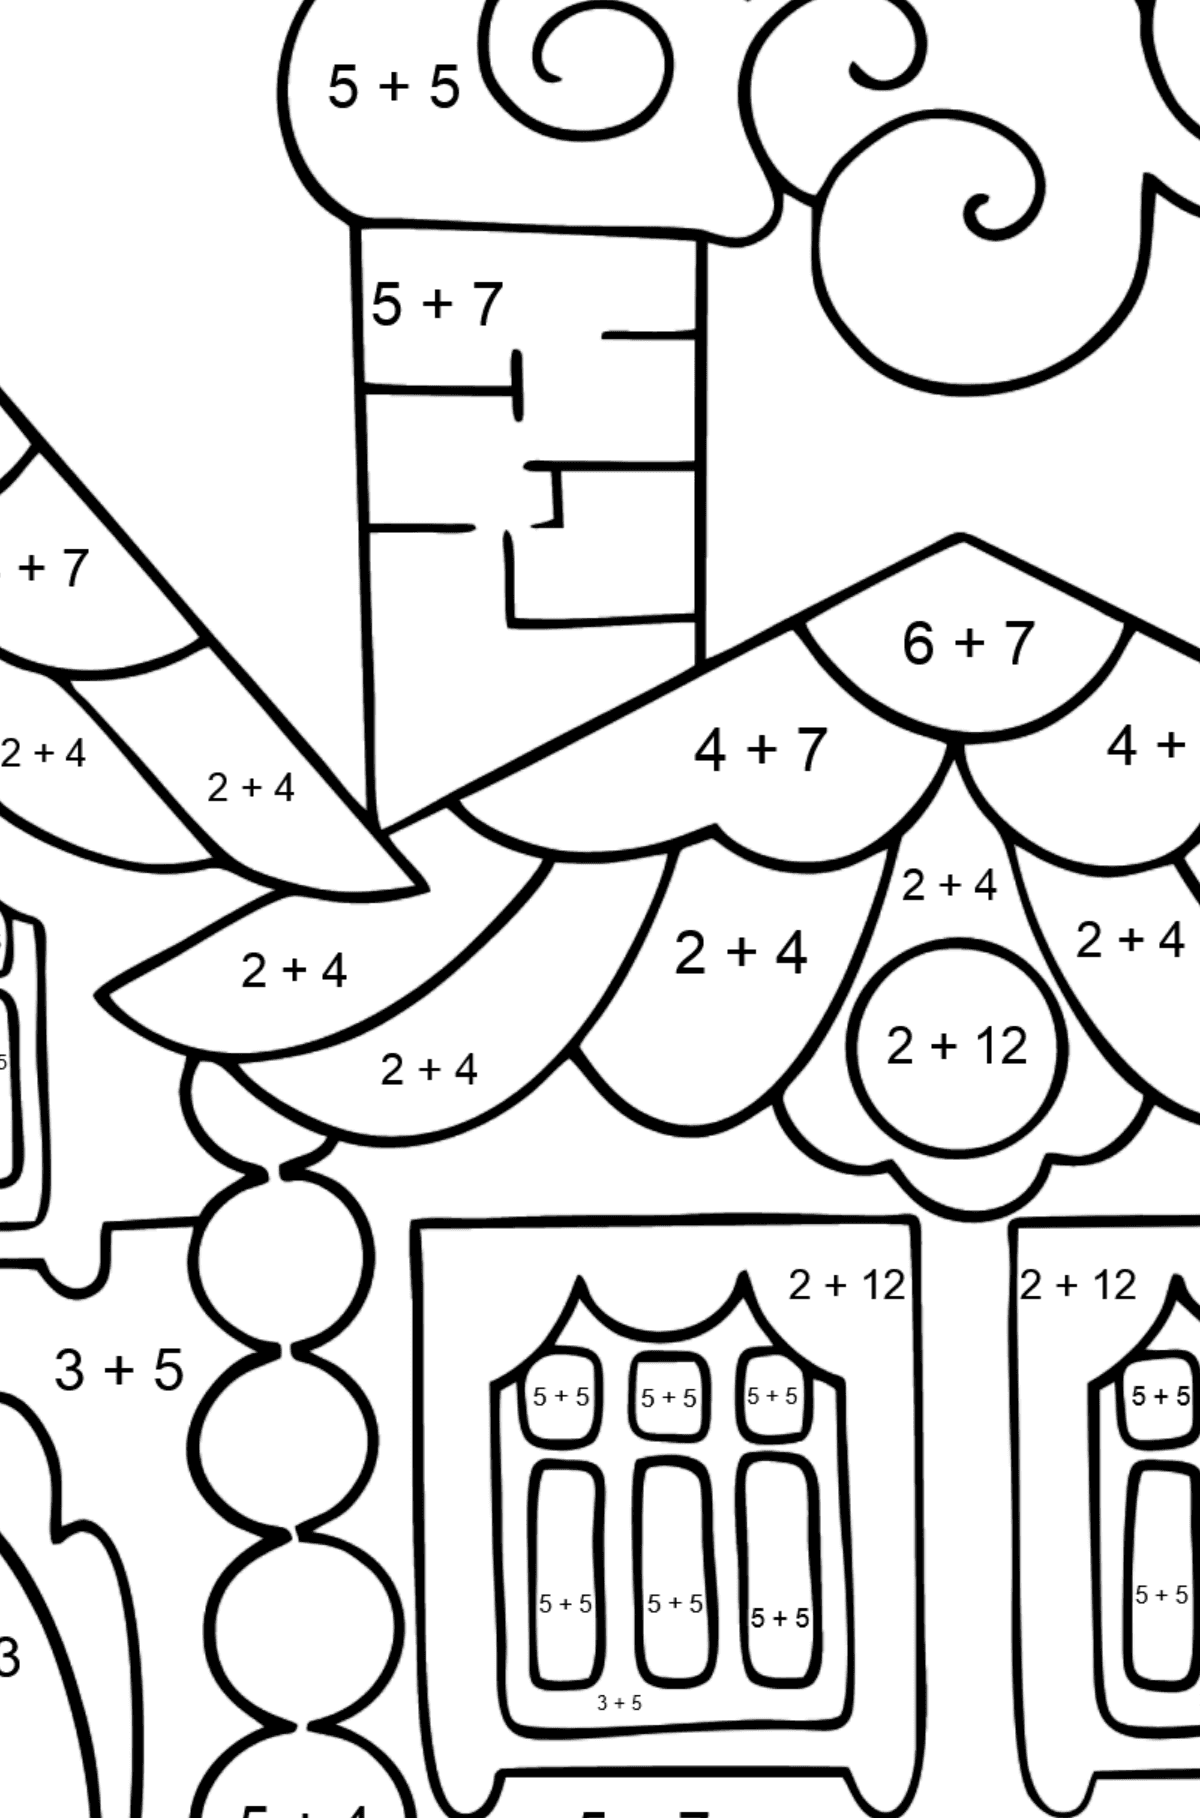 House in the Forest Coloring Page (difficult) - Math Coloring - Addition for Kids